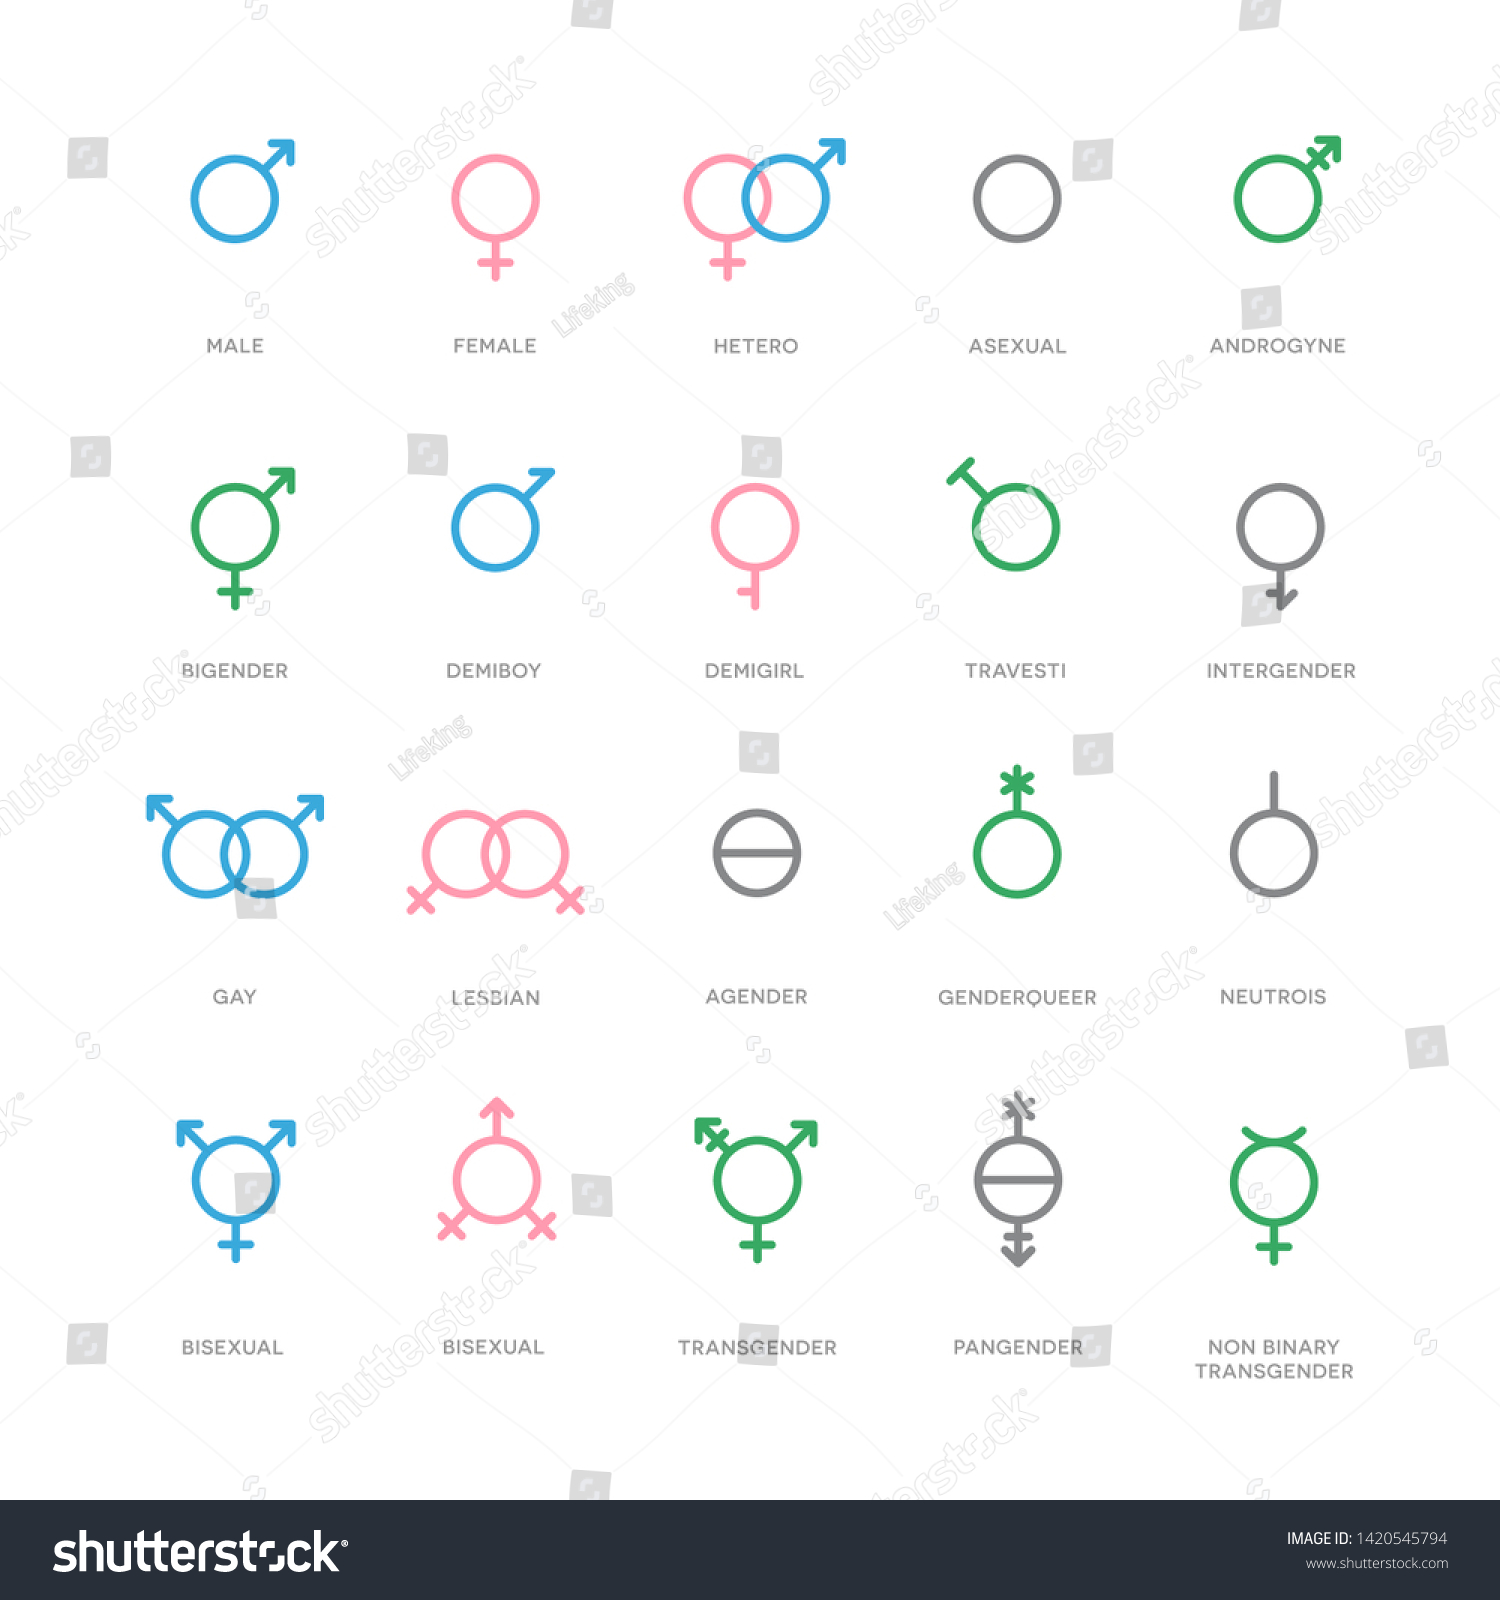 Sexual Orientation Gender Symbols Male Female Stock Vector Royalty Free 1420545794 